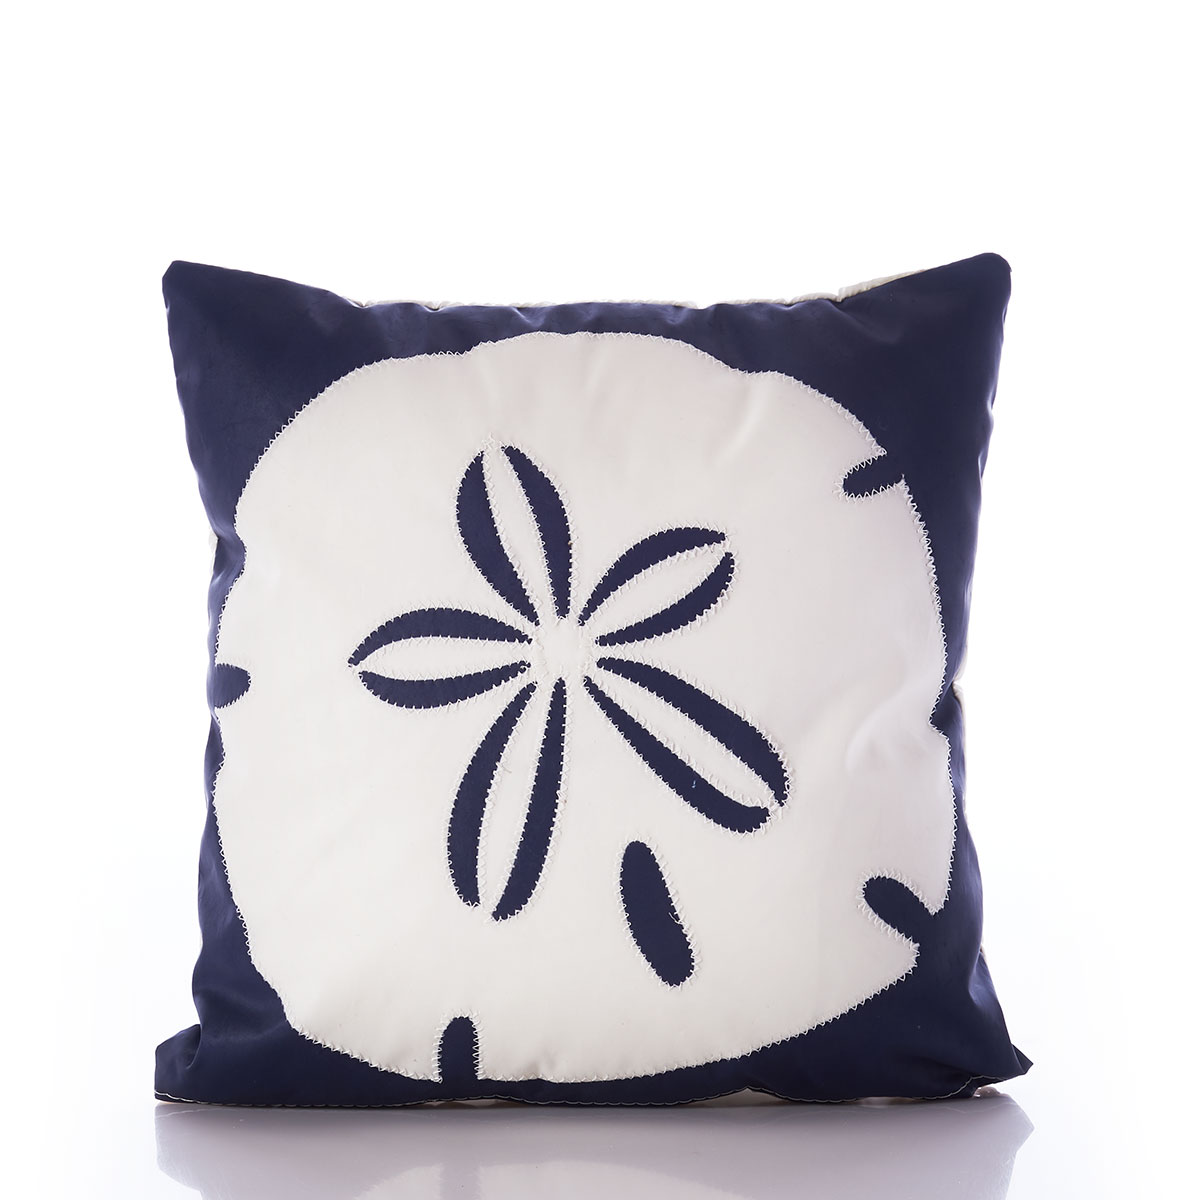 a navy recycled sail cloth pillow is embellished with a white sand dollar